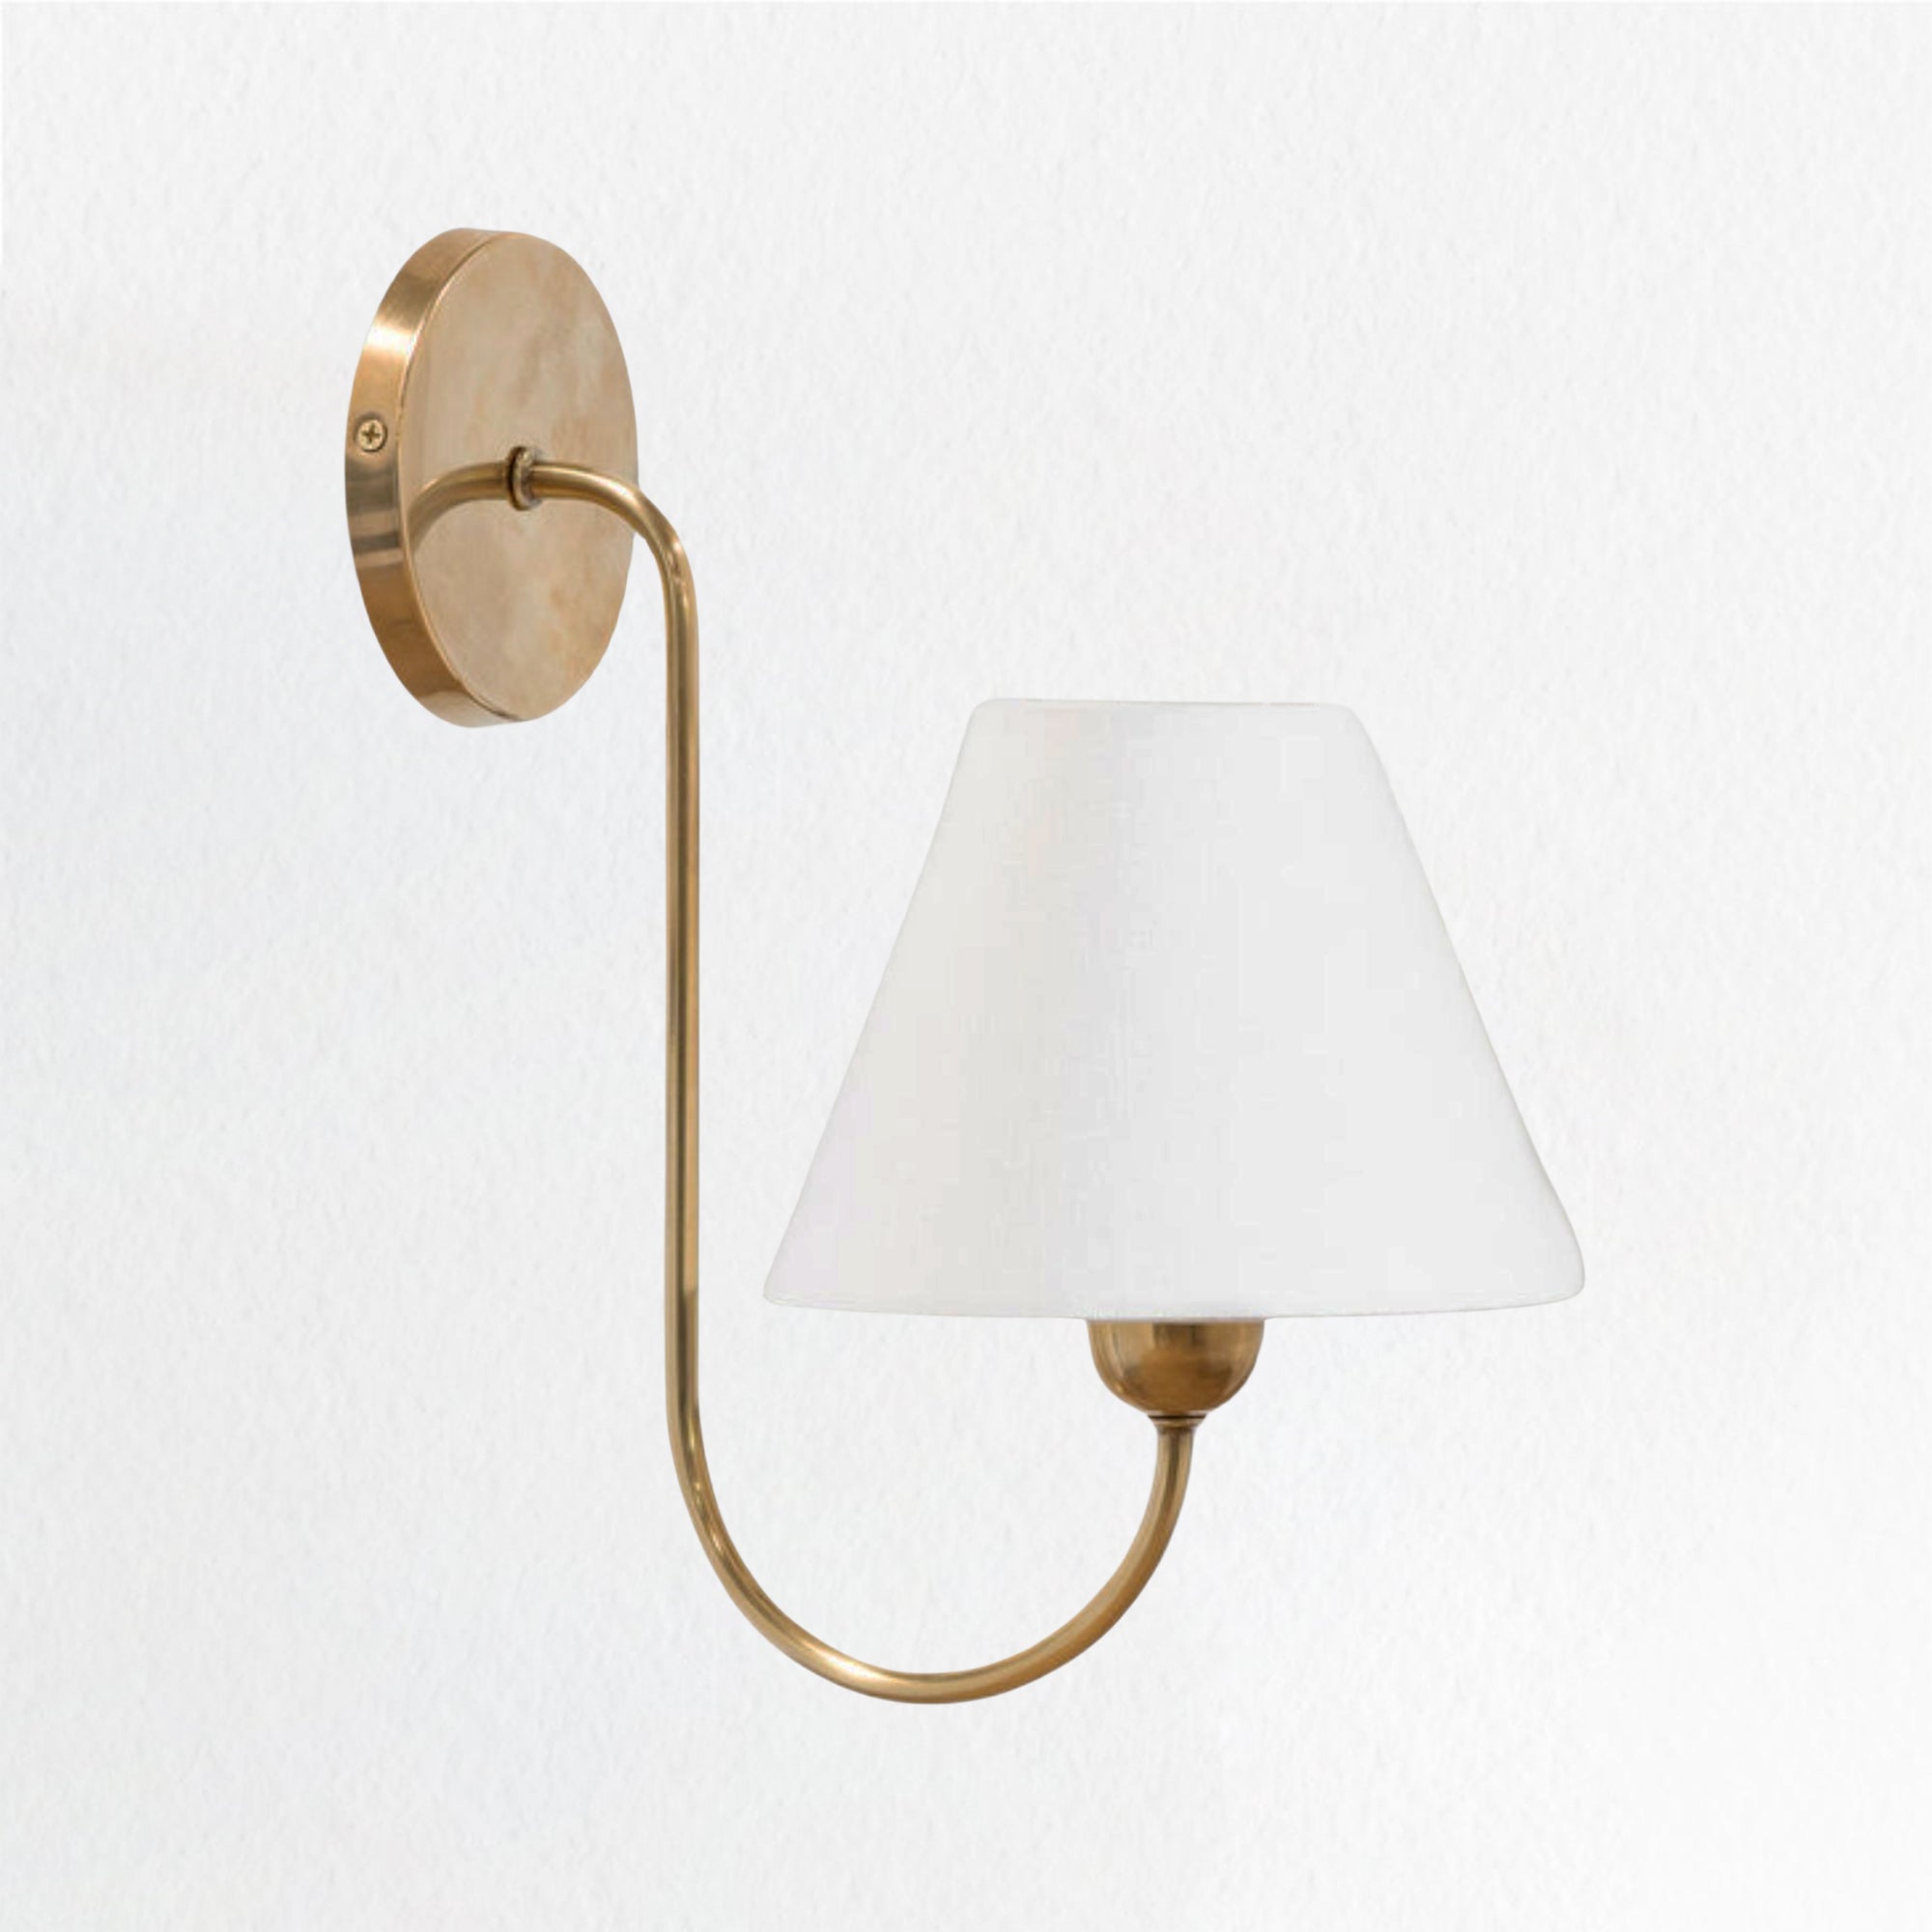 Gleaming Elegance Stainless Oil Rubbed Sconce - Durable Stainless Steel and Antique Brass with White Linen Shade - Ideal Wall Lights for Your Living Room